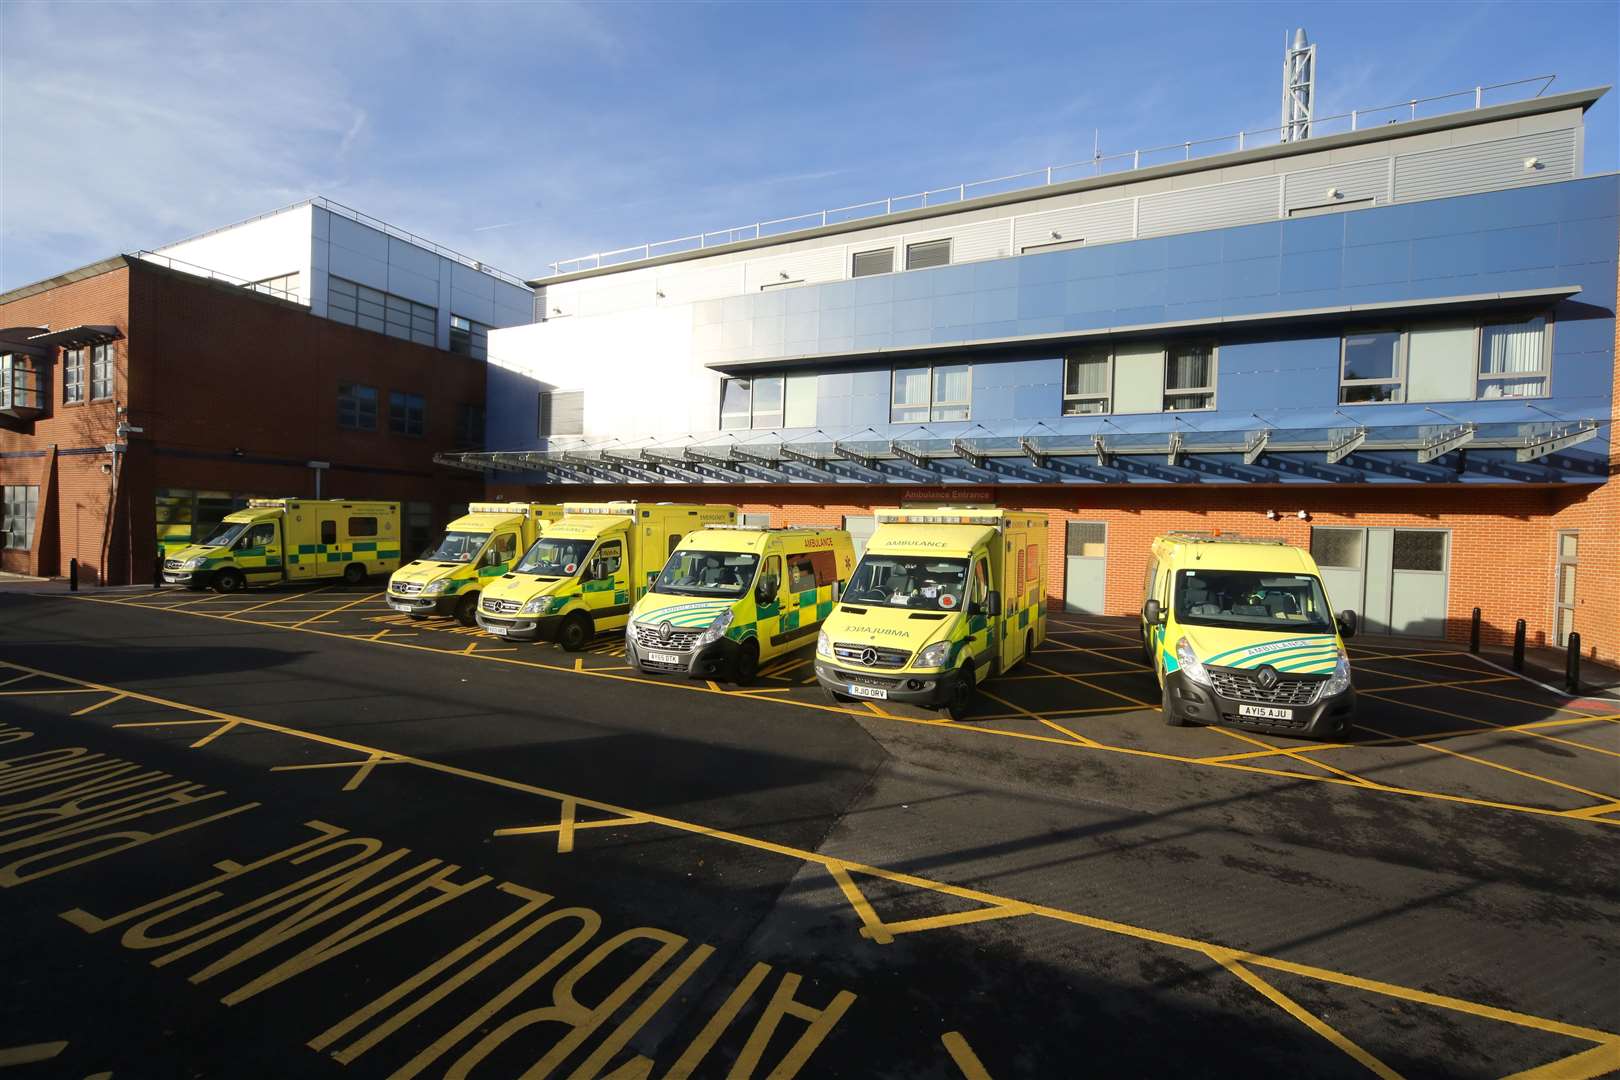 There are long waiting times at A&E